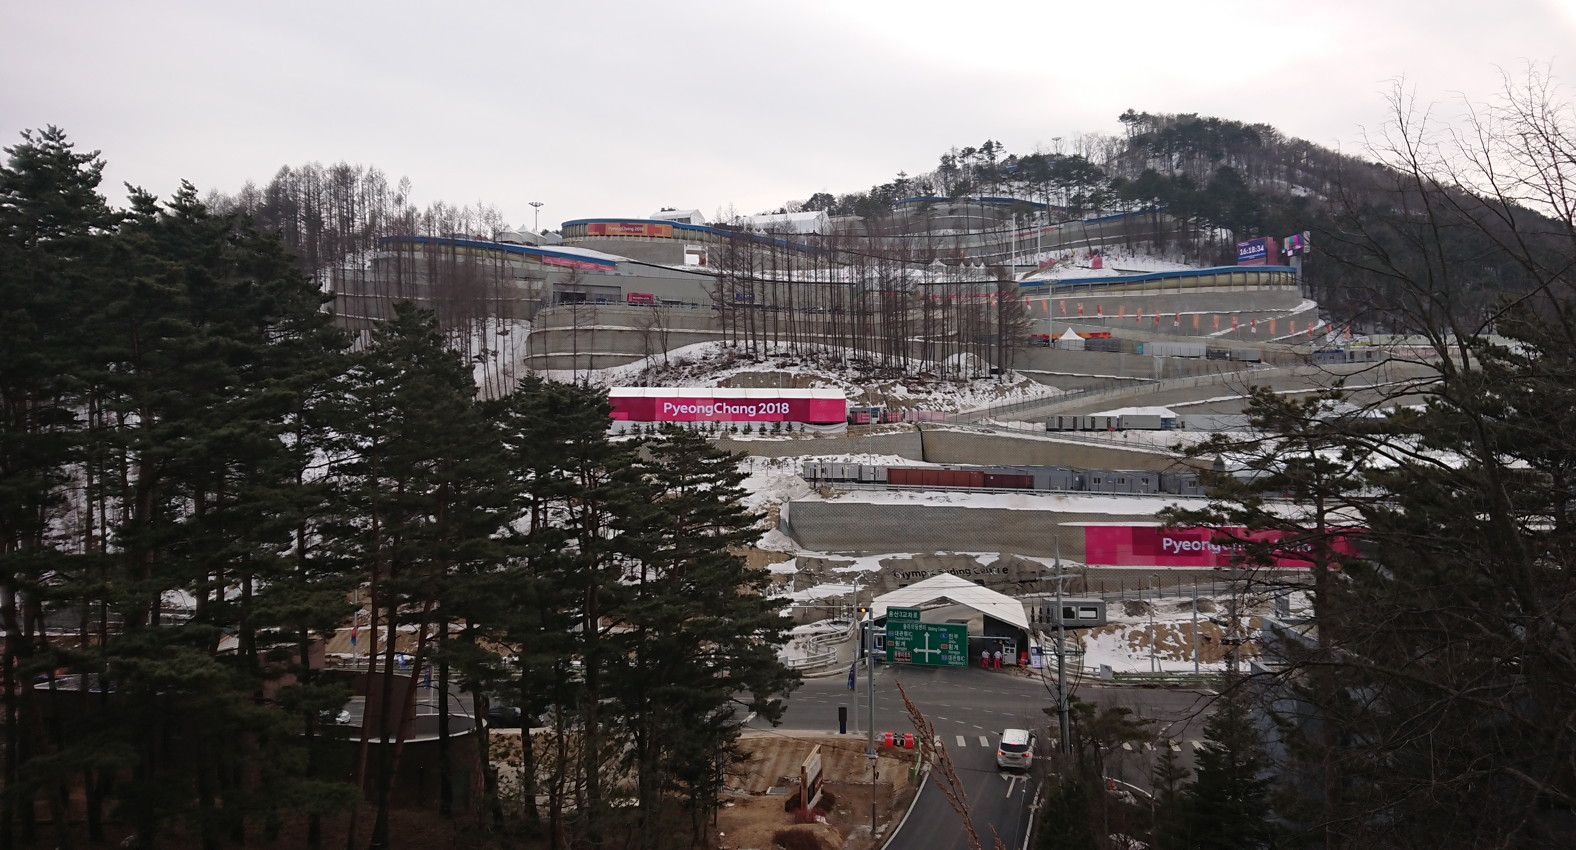 Enlarged view: Bobsled run